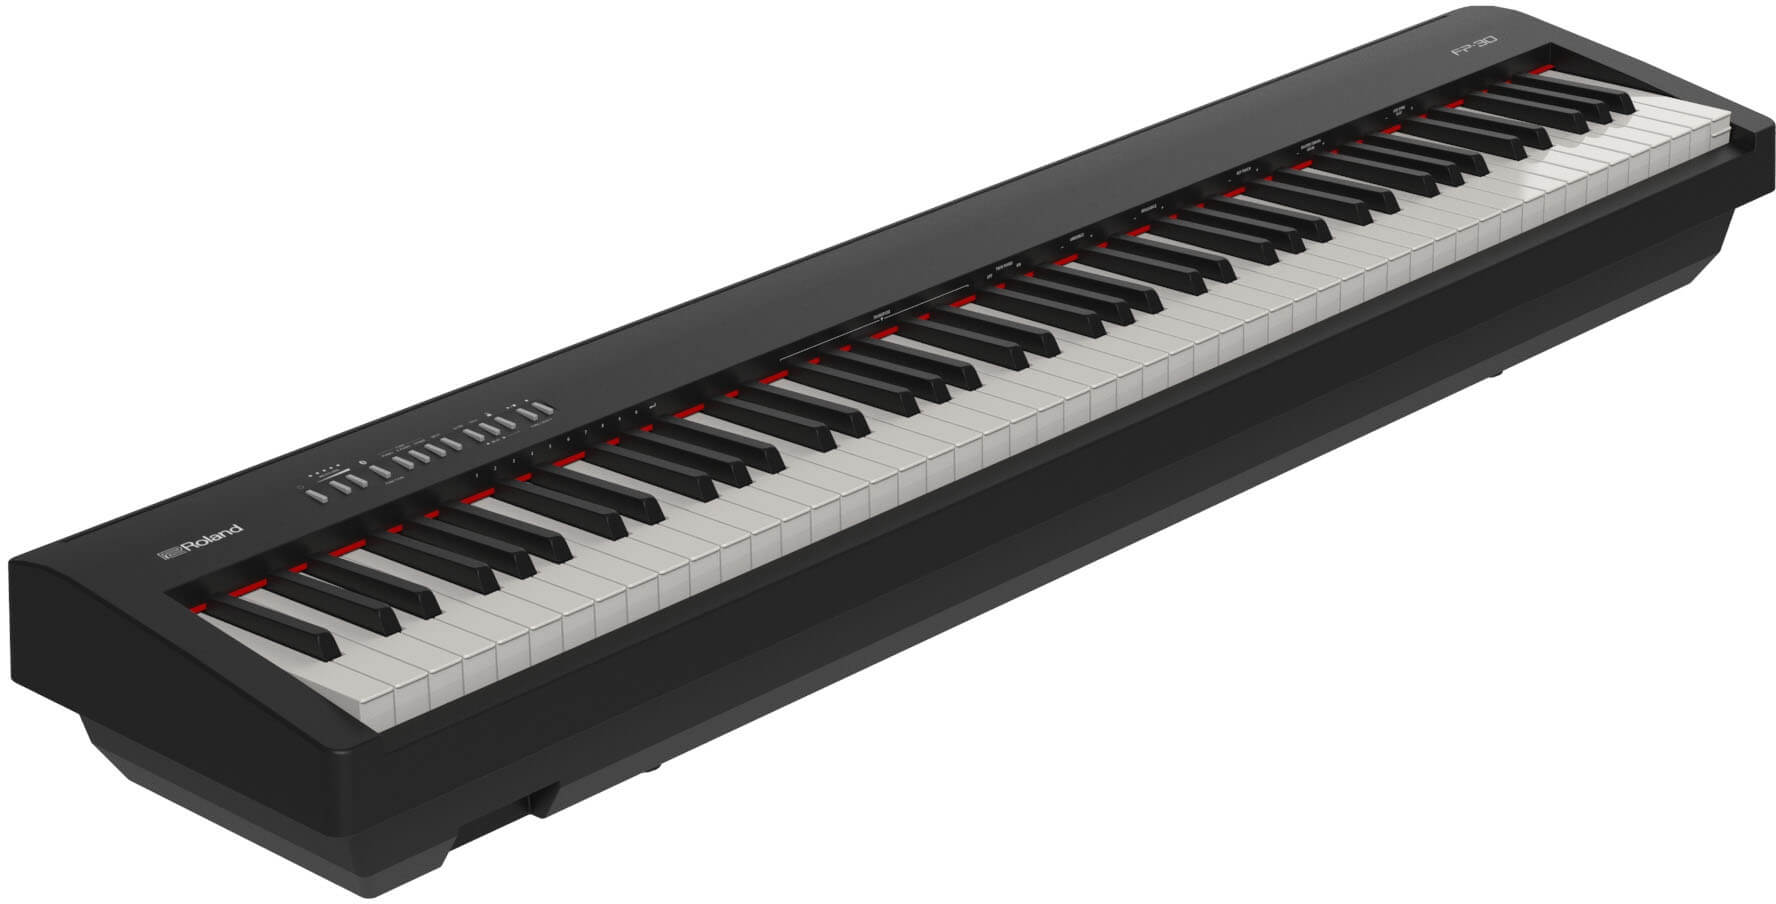 Why Roland FP-30X Feels Like a Grand Piano 